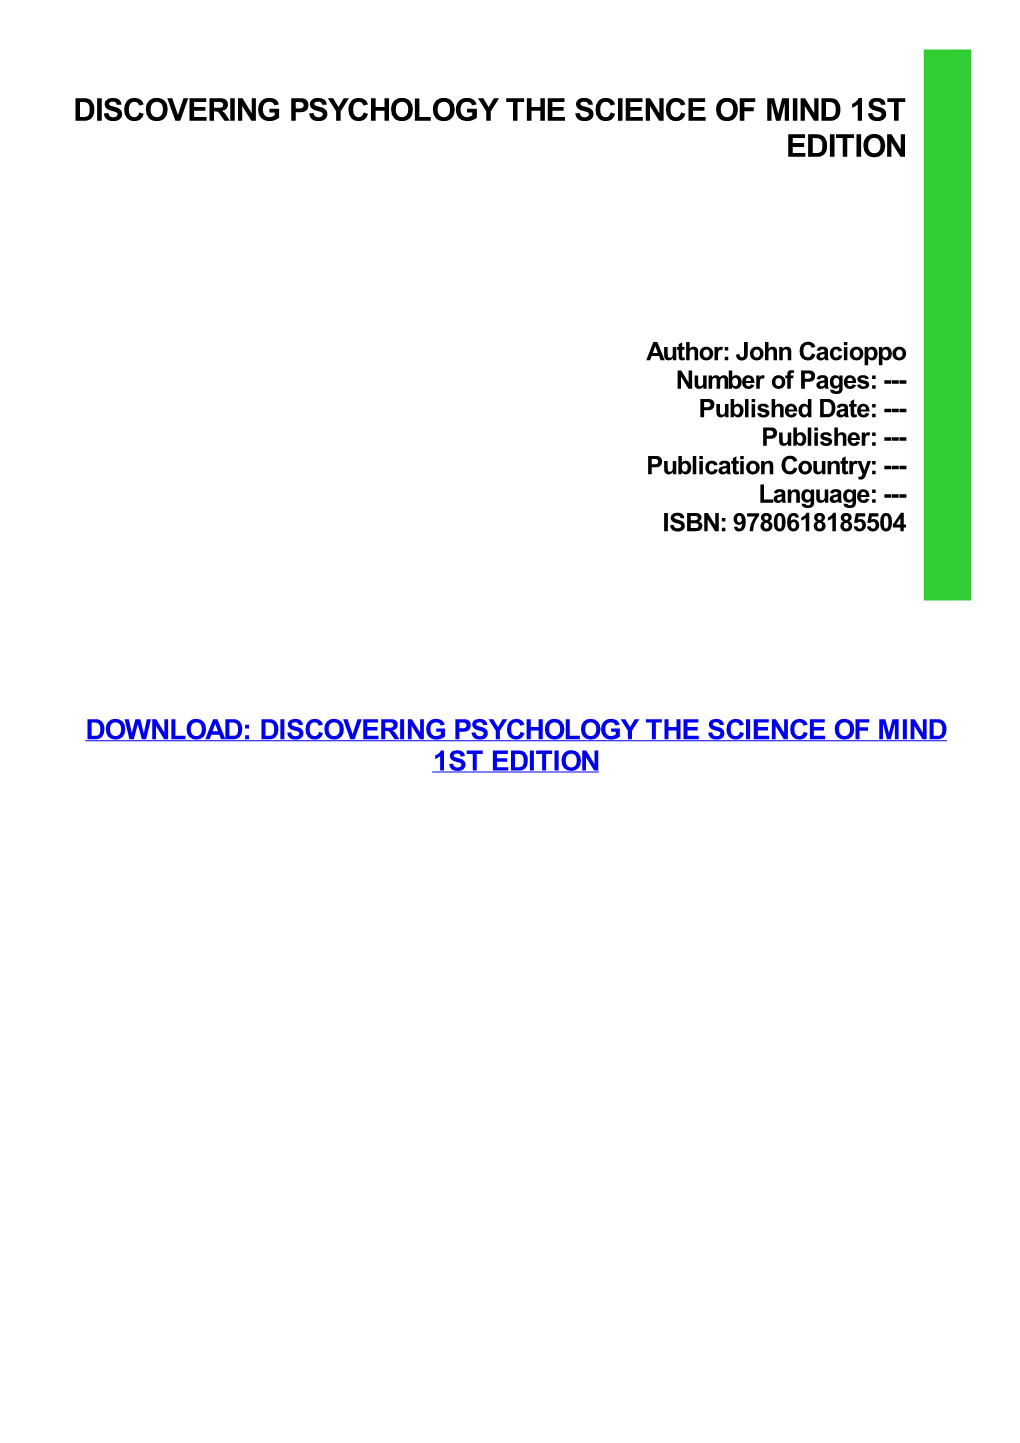 Discovering Psychology the Science of Mind 1St Edition Download